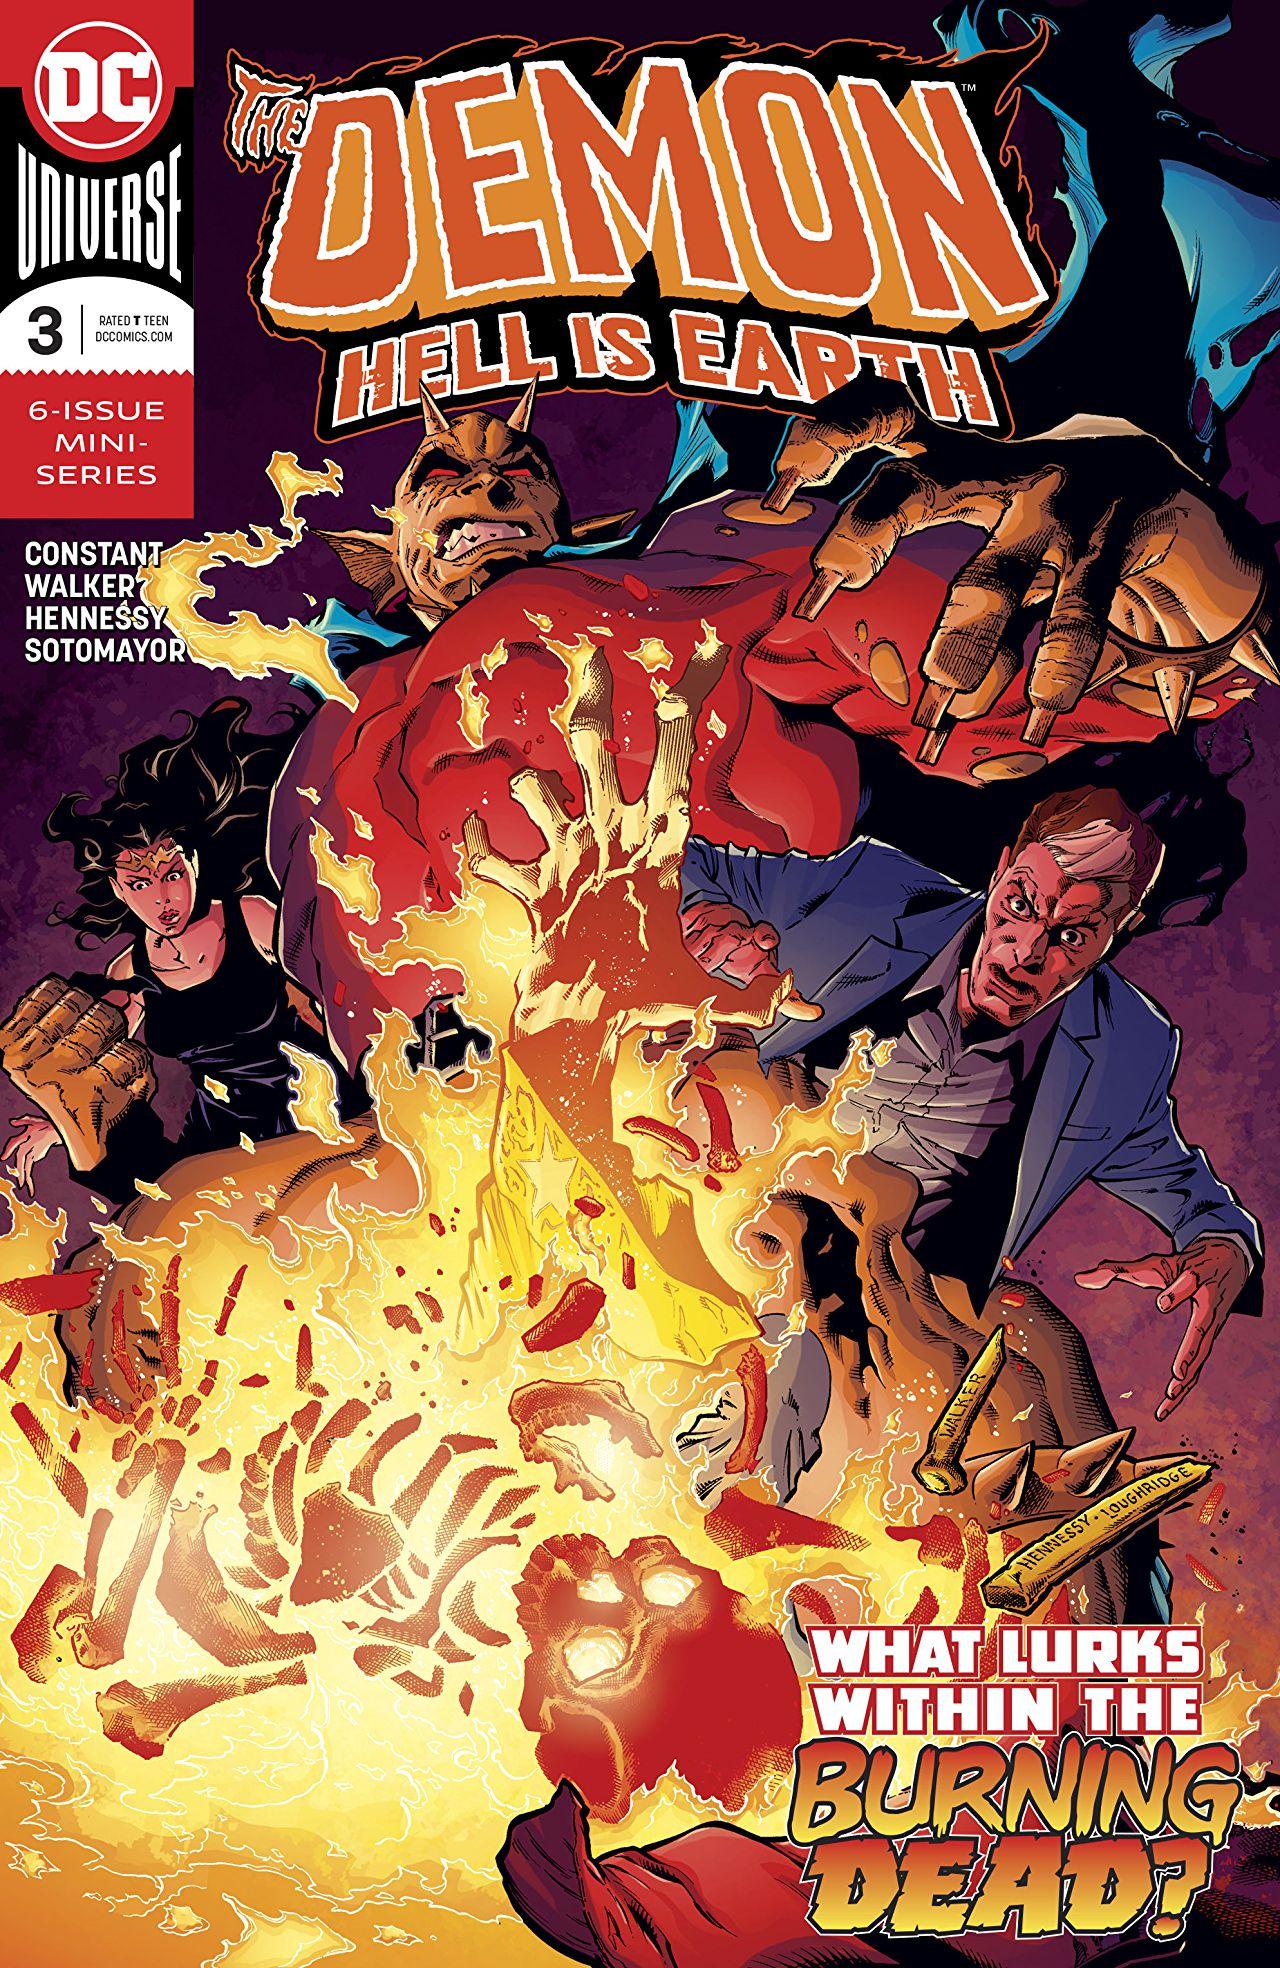 The Demon: Hell Is Earth Vol. 1 #3